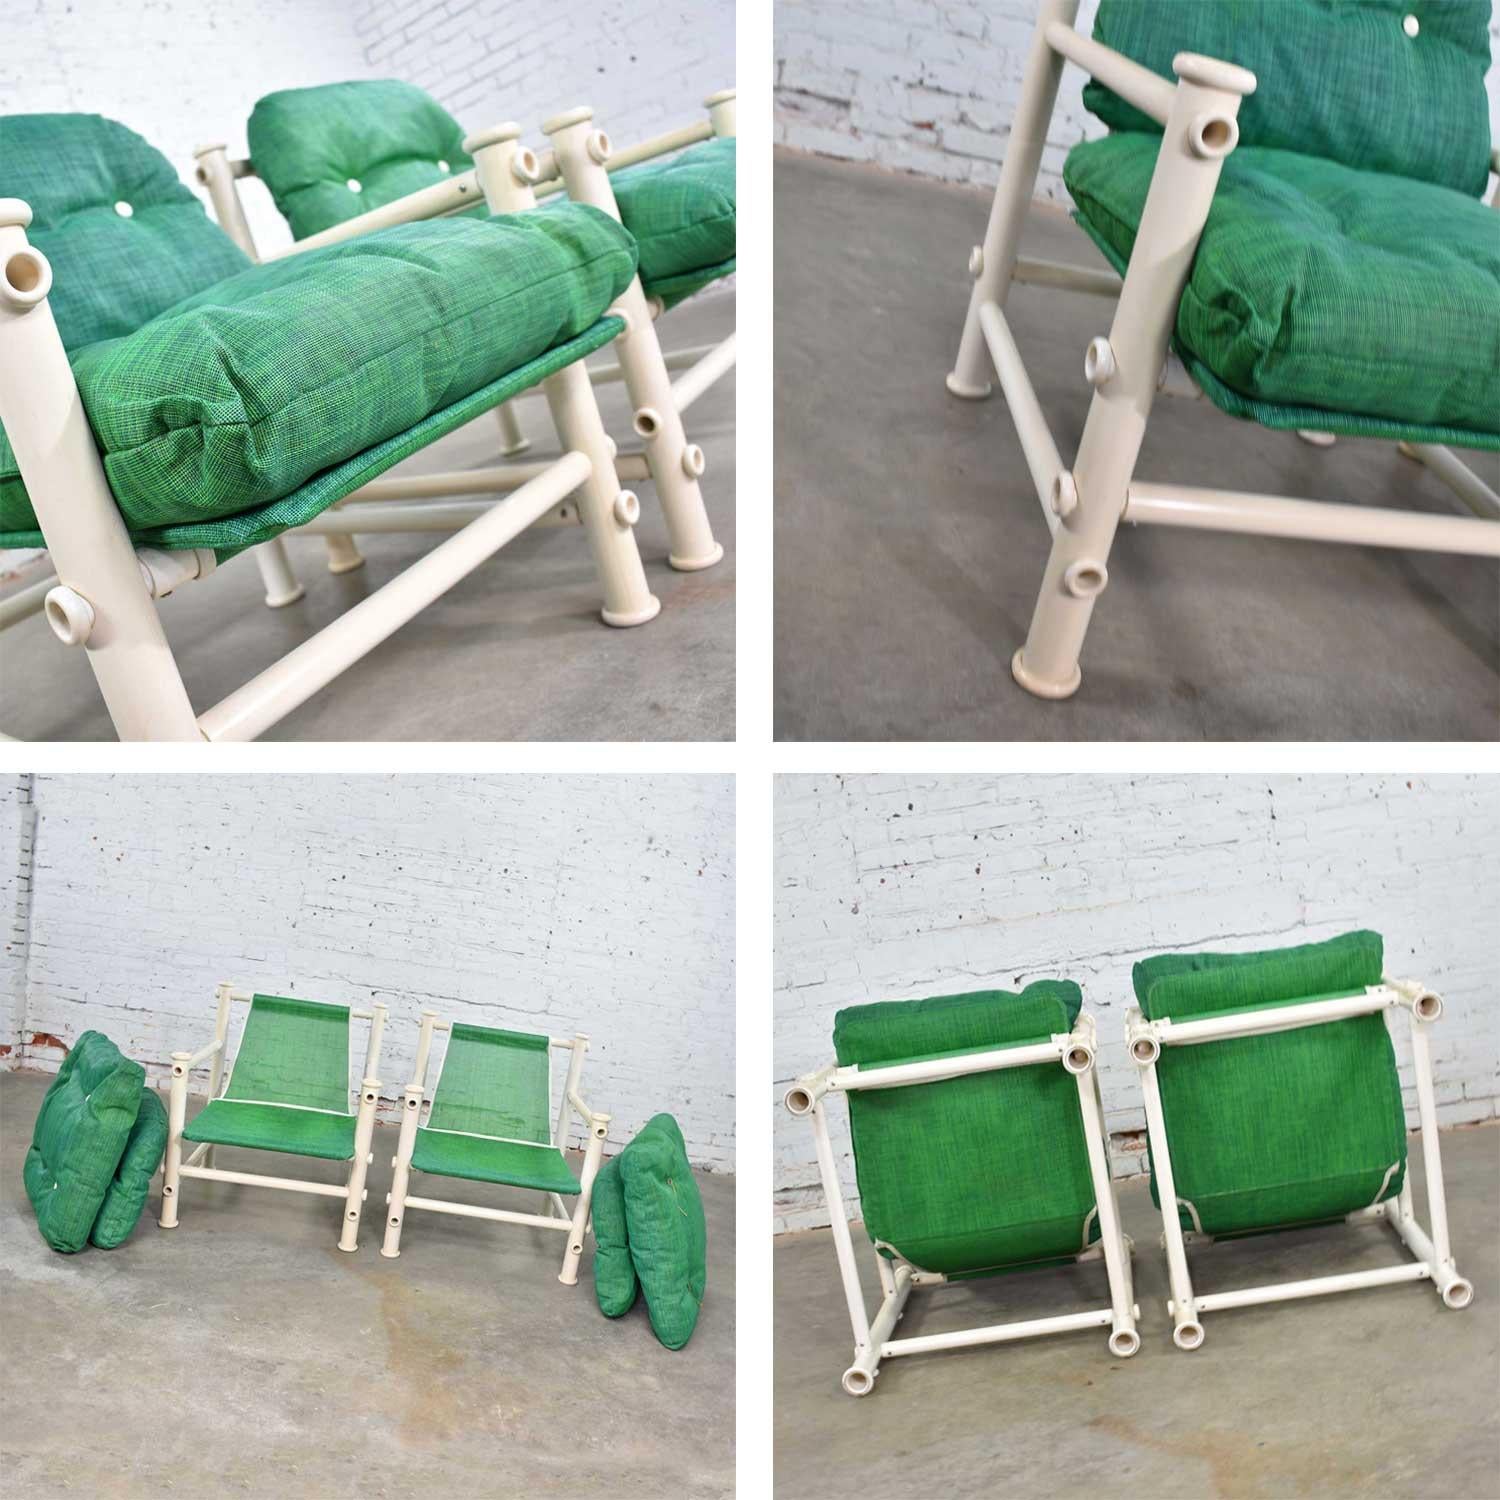 2 Jerry Johnson Landes PVC Outdoor Idyllwild Lounge Chairs Green Mesh Upholstery For Sale 3